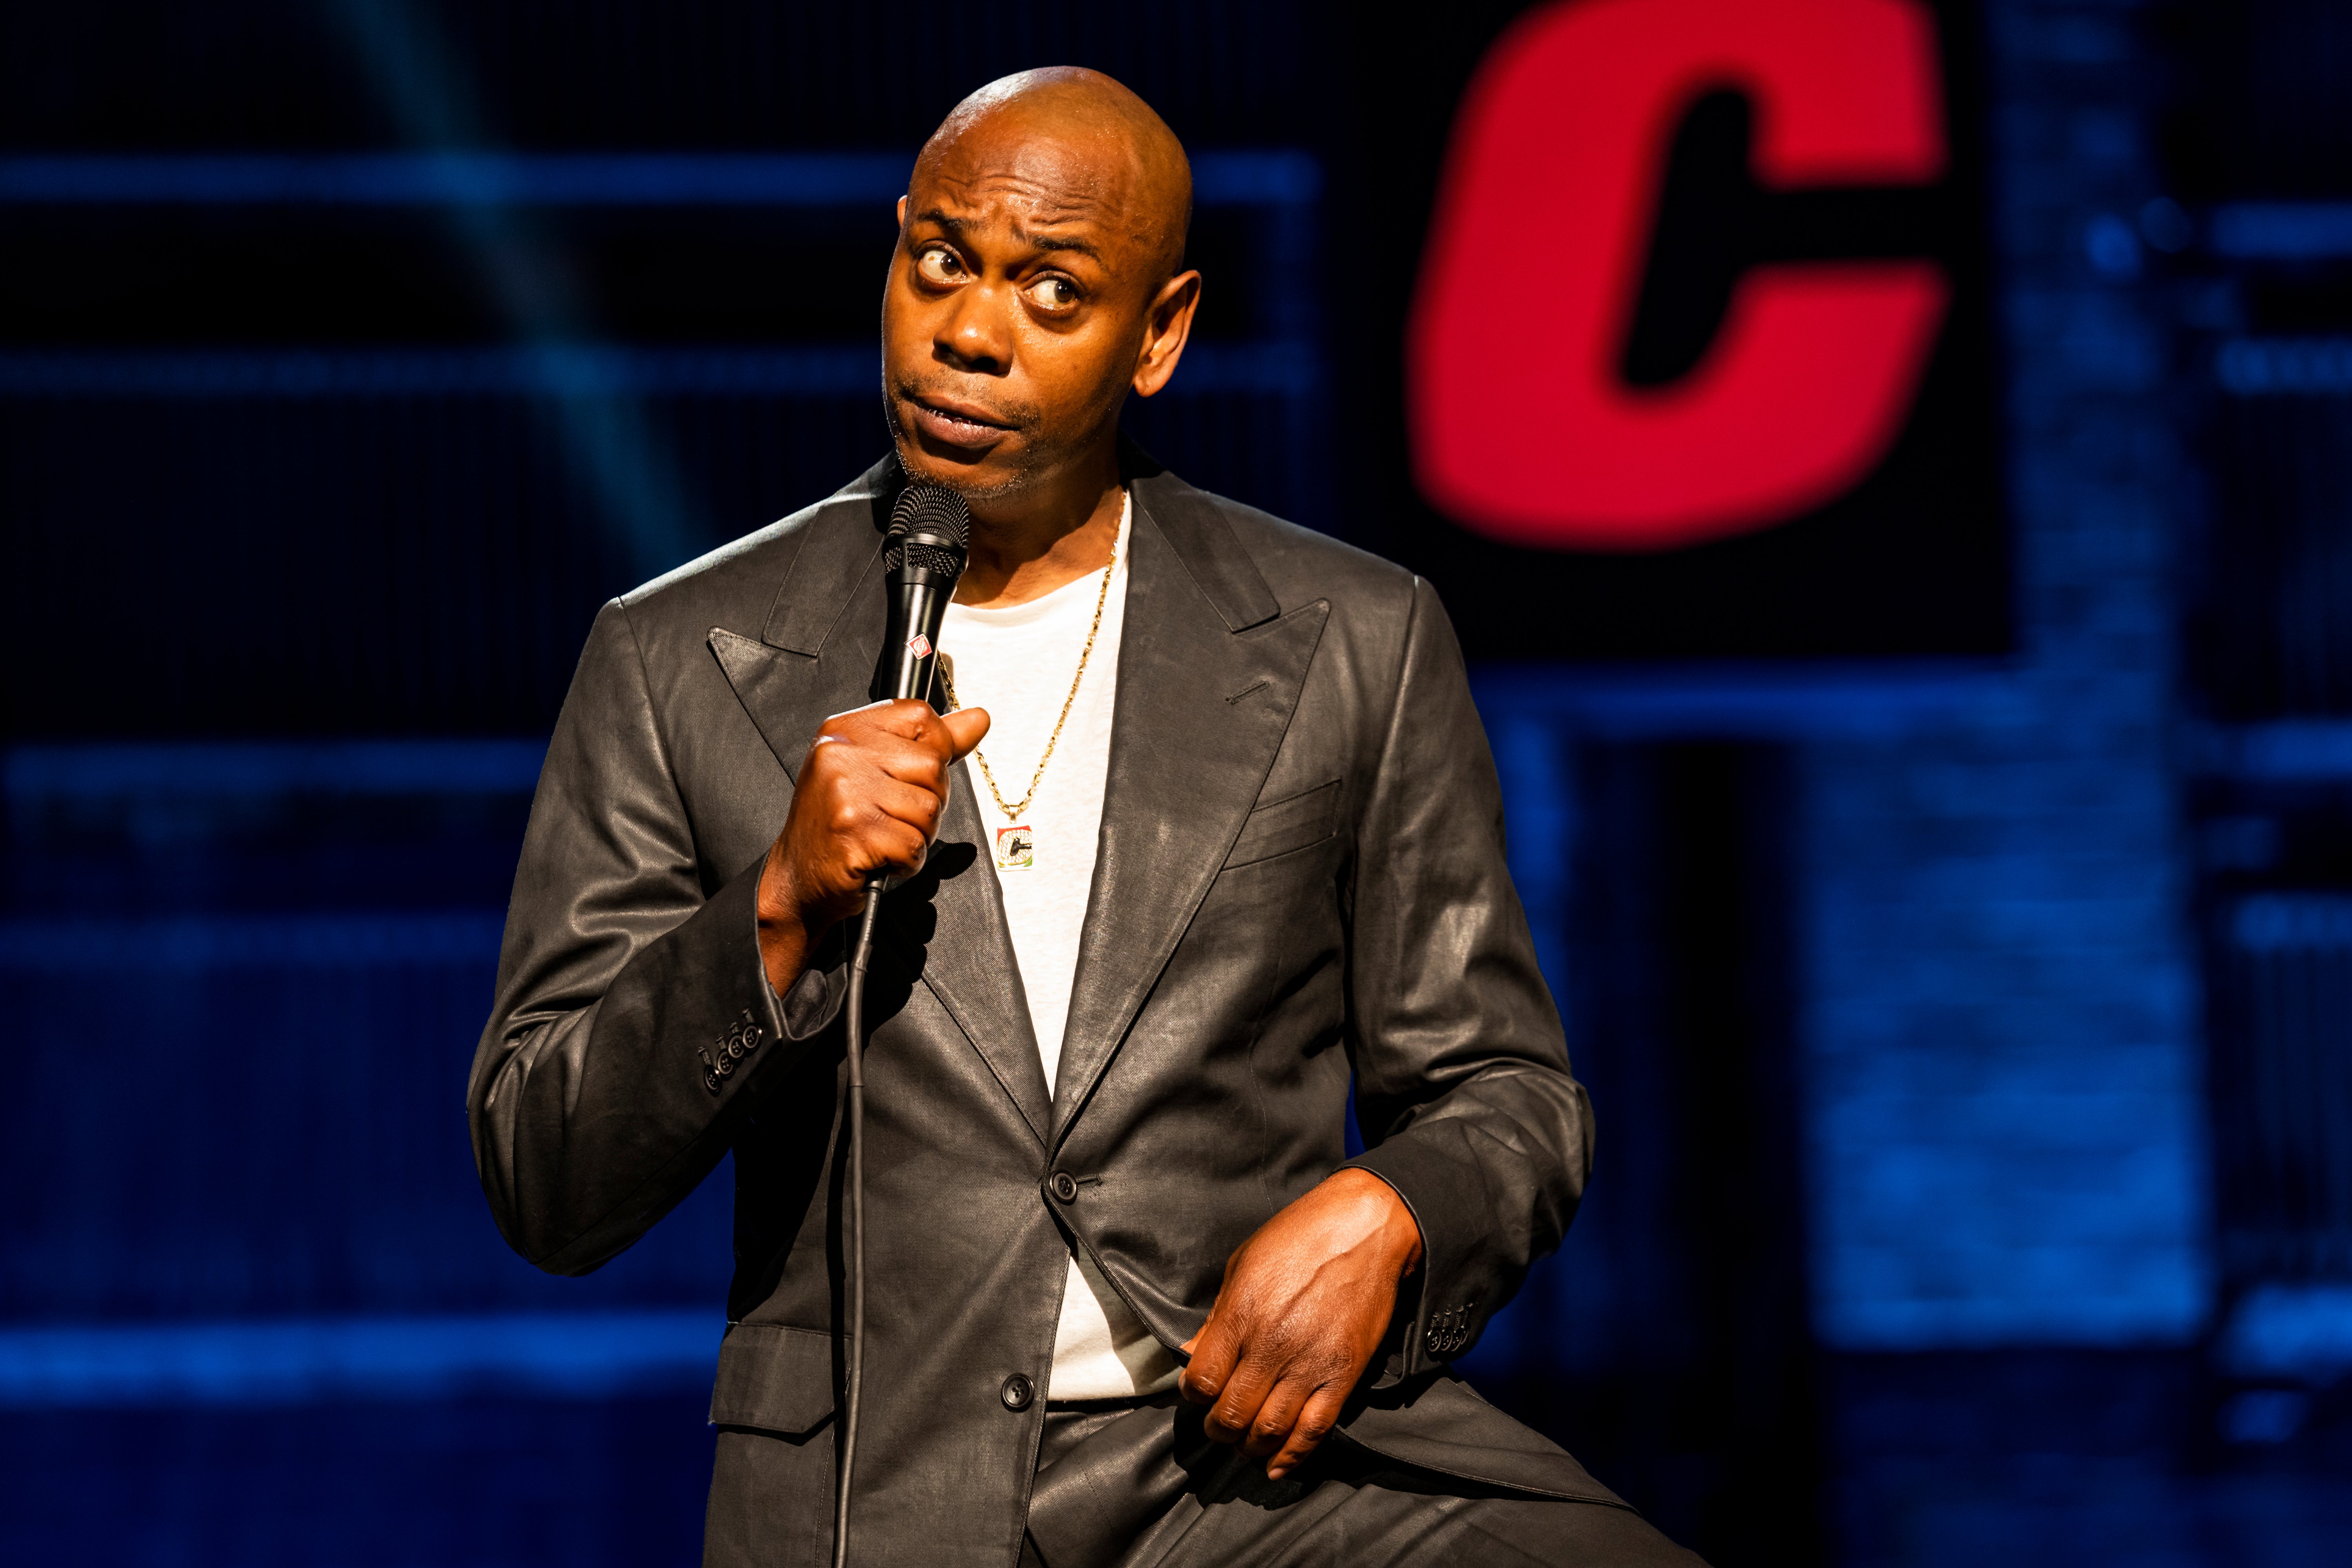 Dave Chappelle in ‘The Closer’